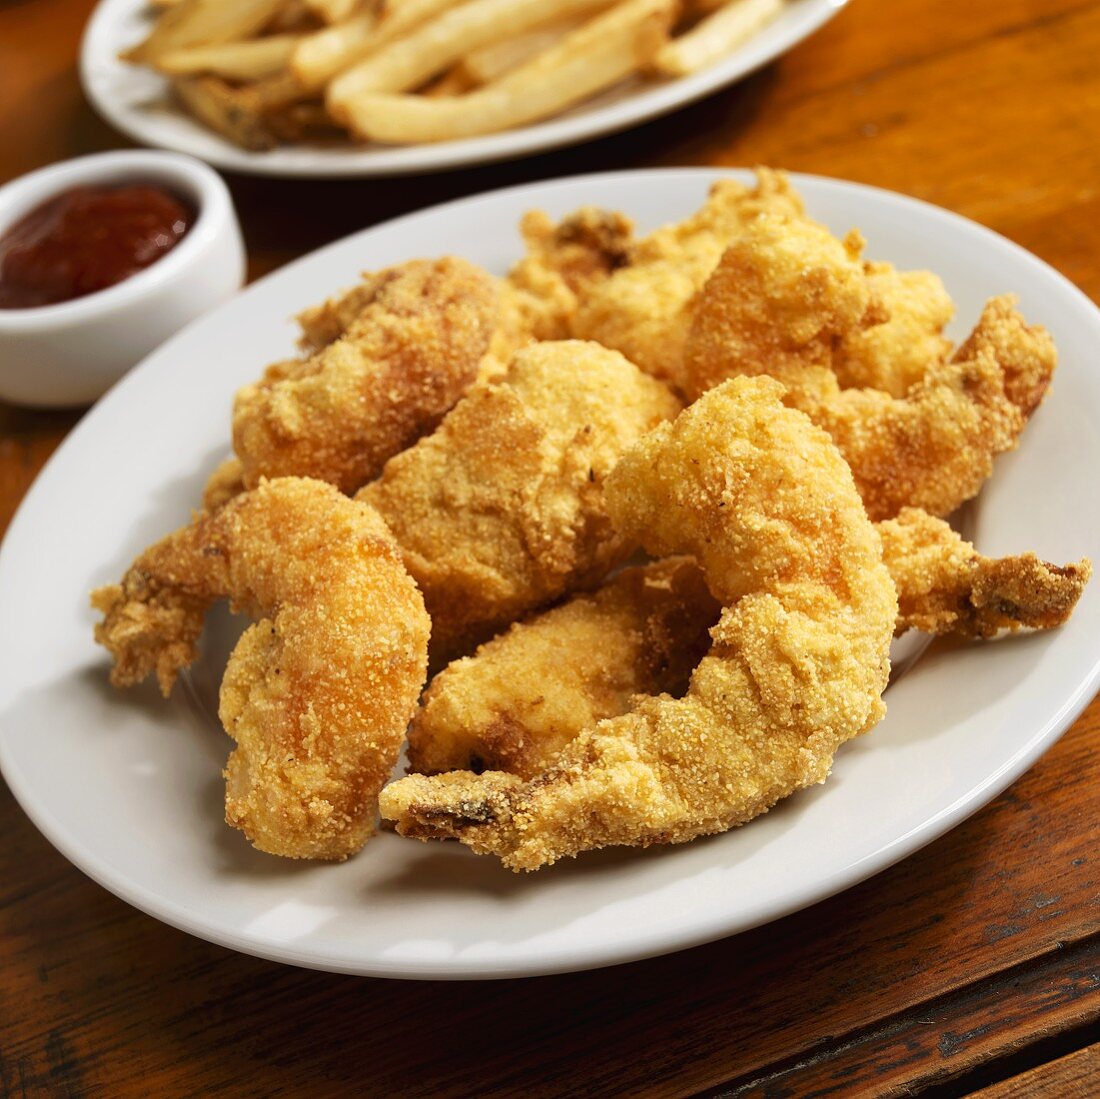 Fried Shrimp Battered with Cornmeal; Cocktail Sauce and Fries